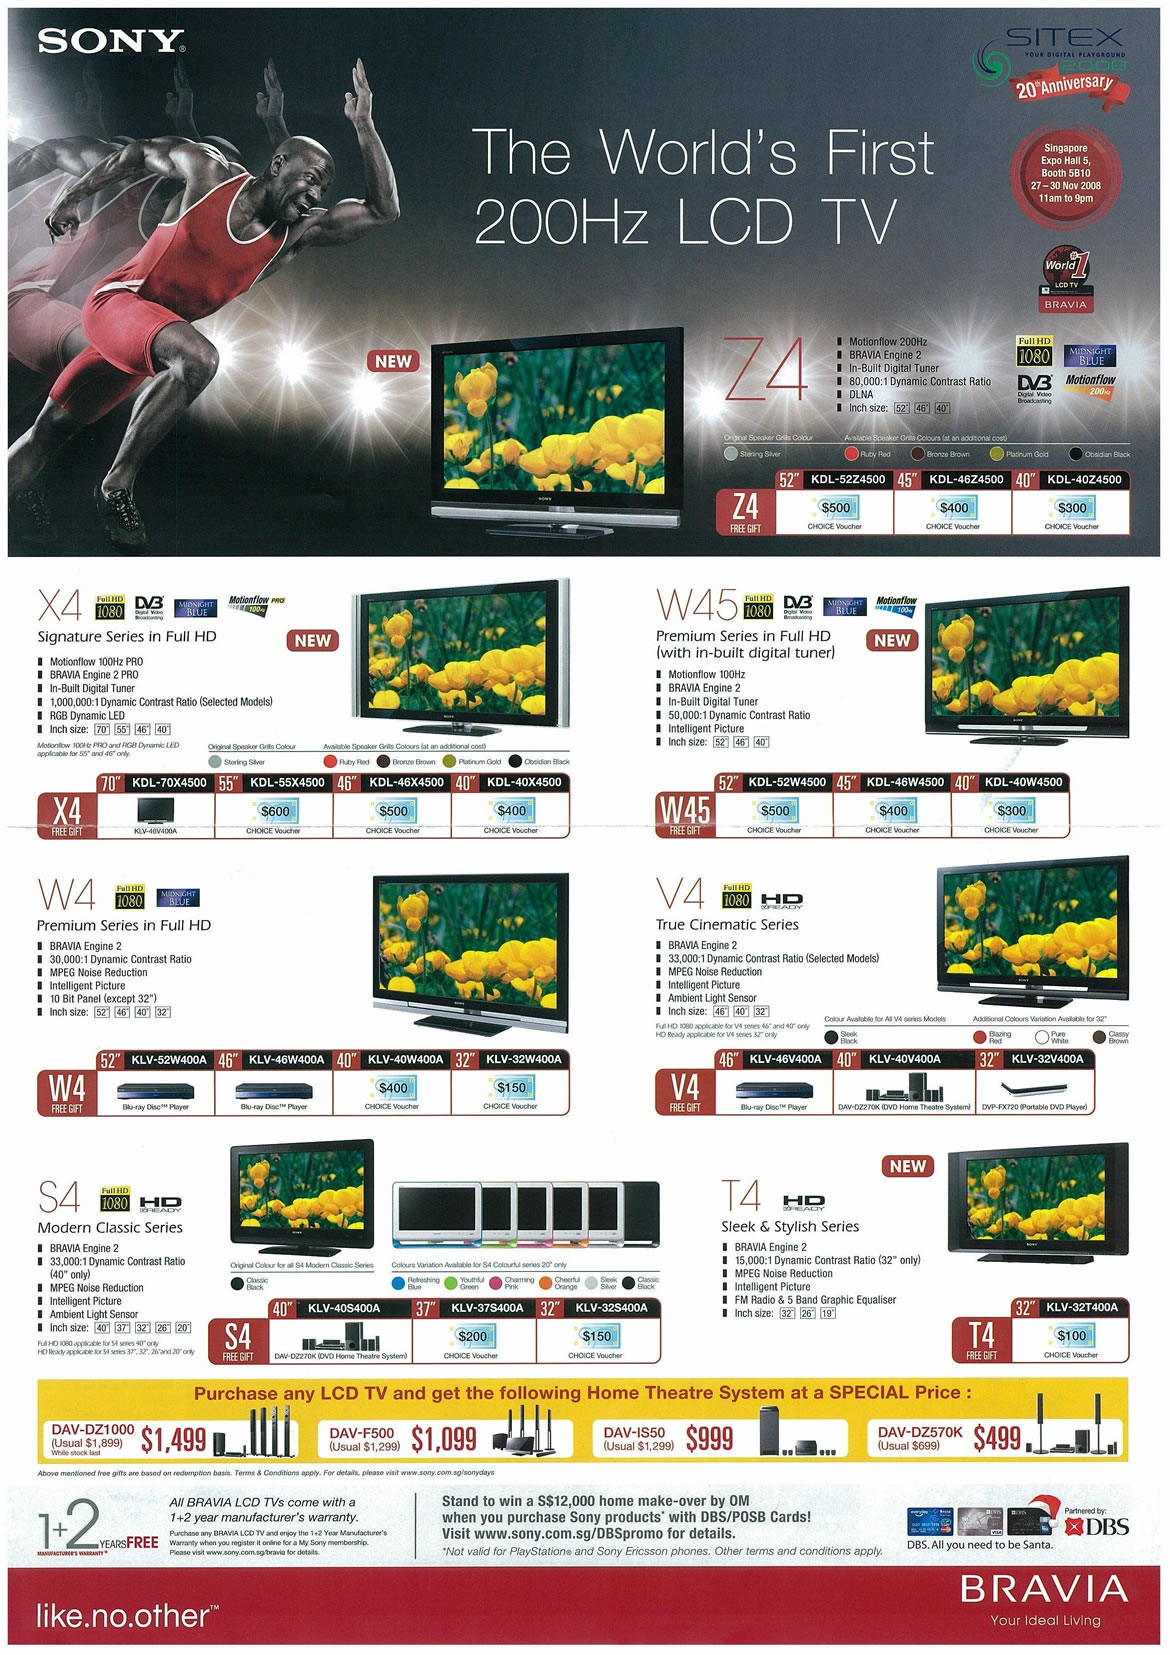 Sitex 2008 price list image brochure of Sony LCD TVs Page 1 - Vr-zone Tclong